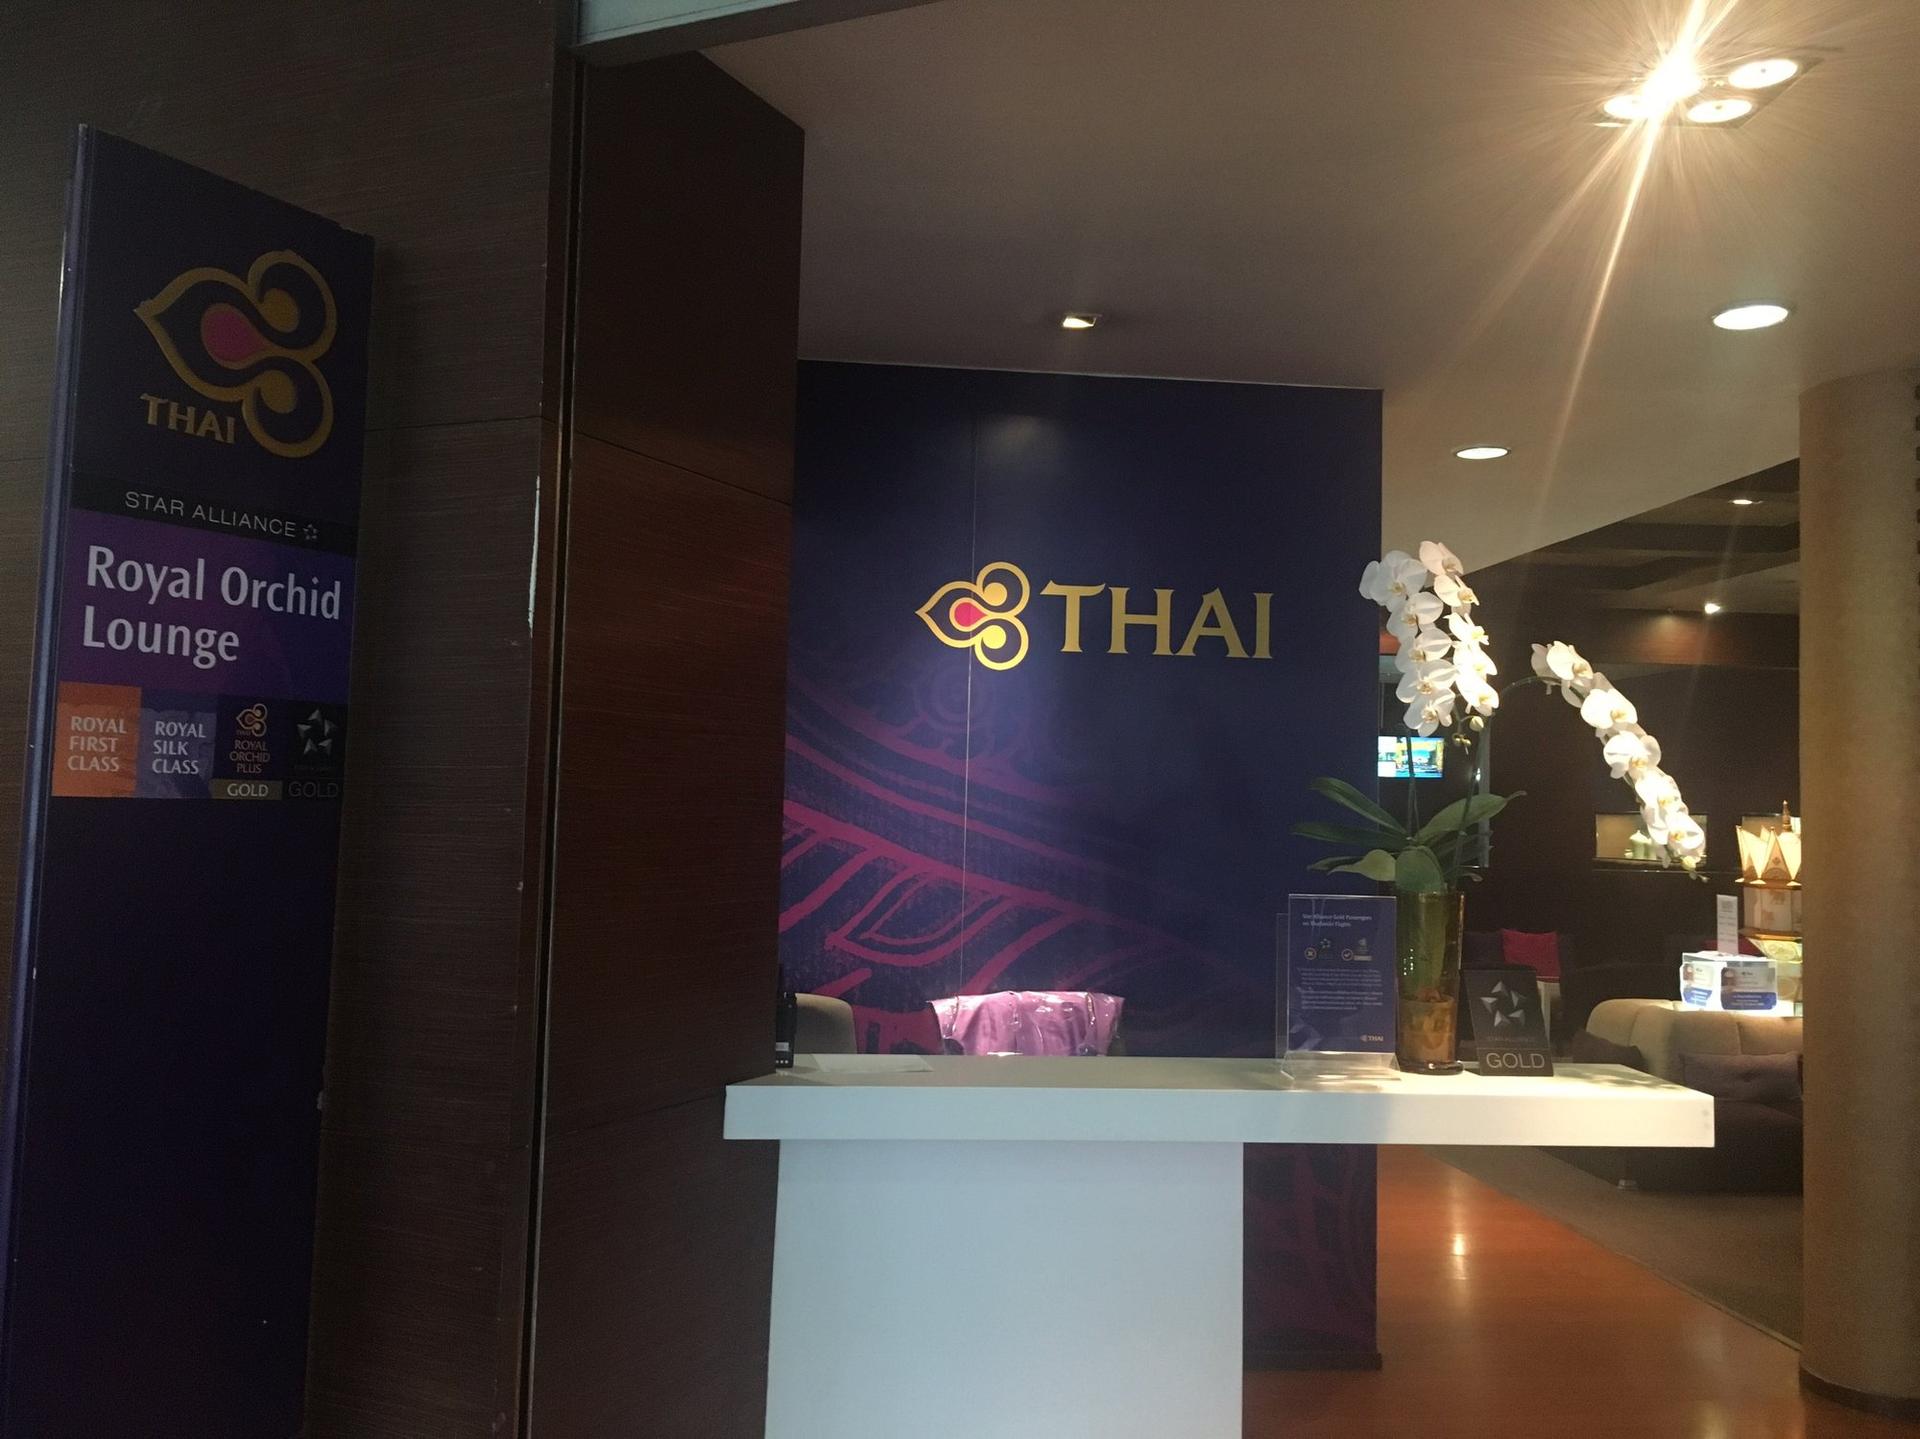 Thai Airways Royal Orchid Lounge image 21 of 22